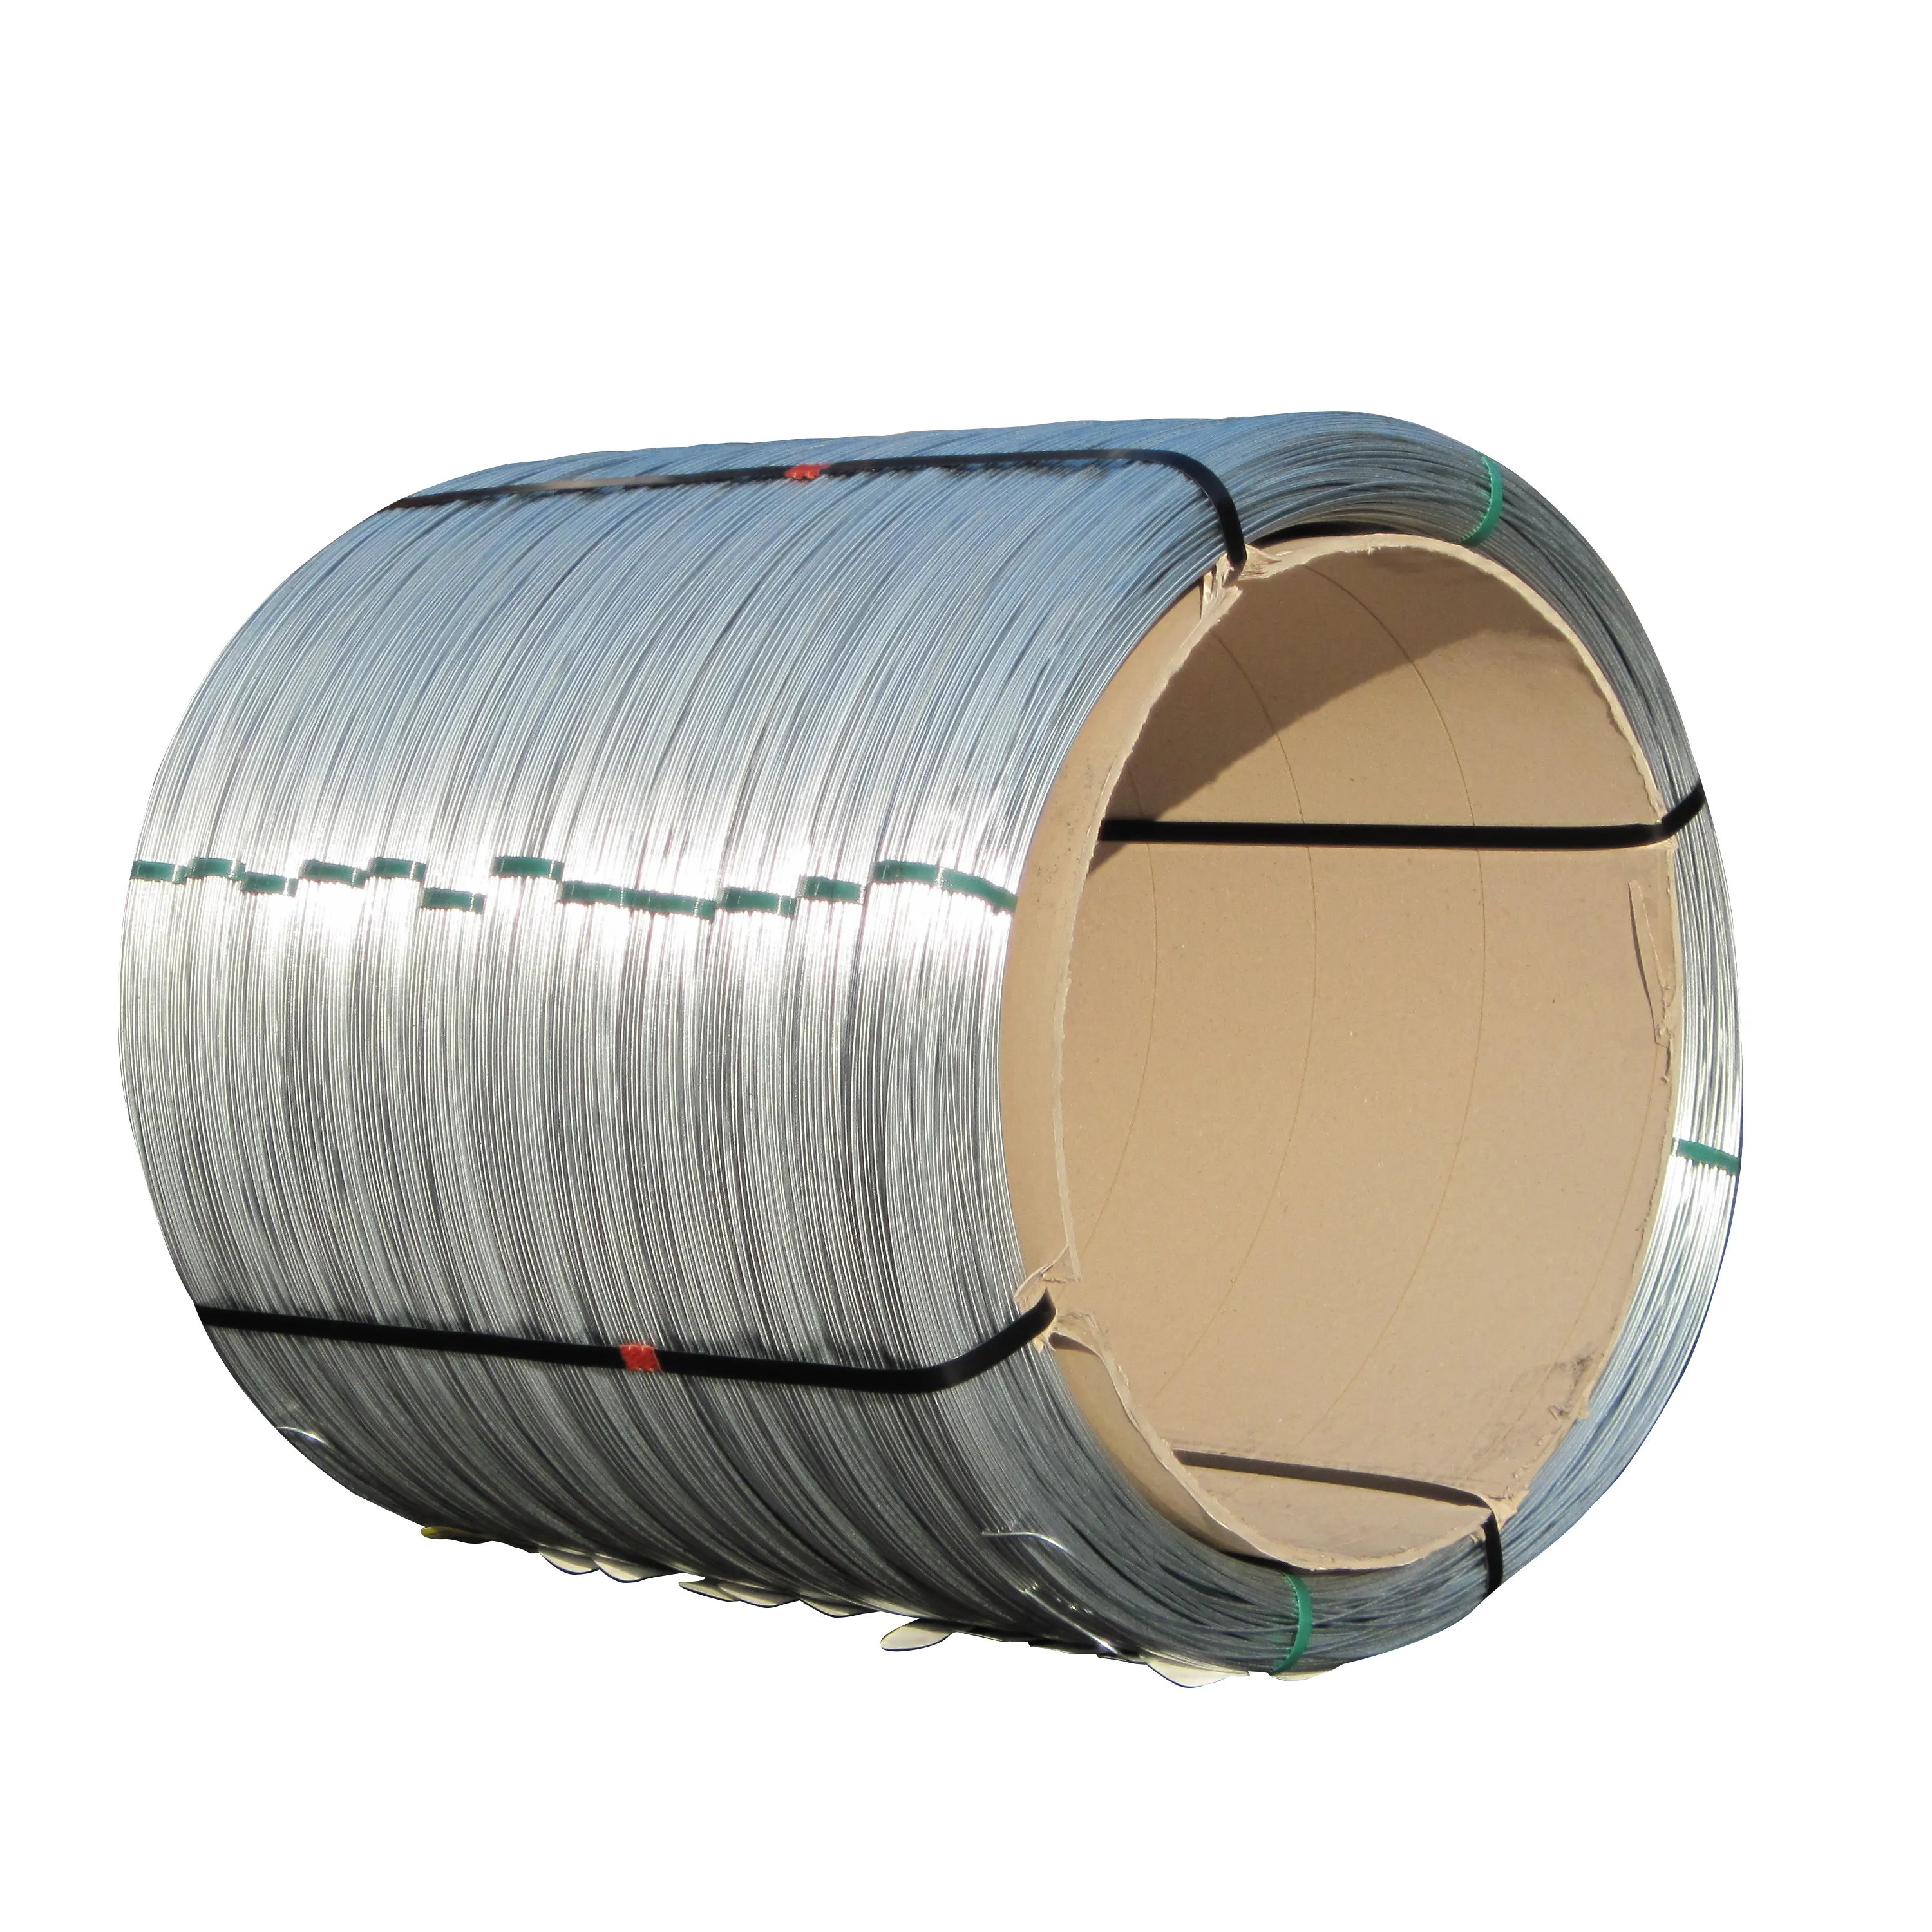 Top quality Made in Italy zinc-aluminium steel wire diam. 3.00 mm for orchards in agriculture installations